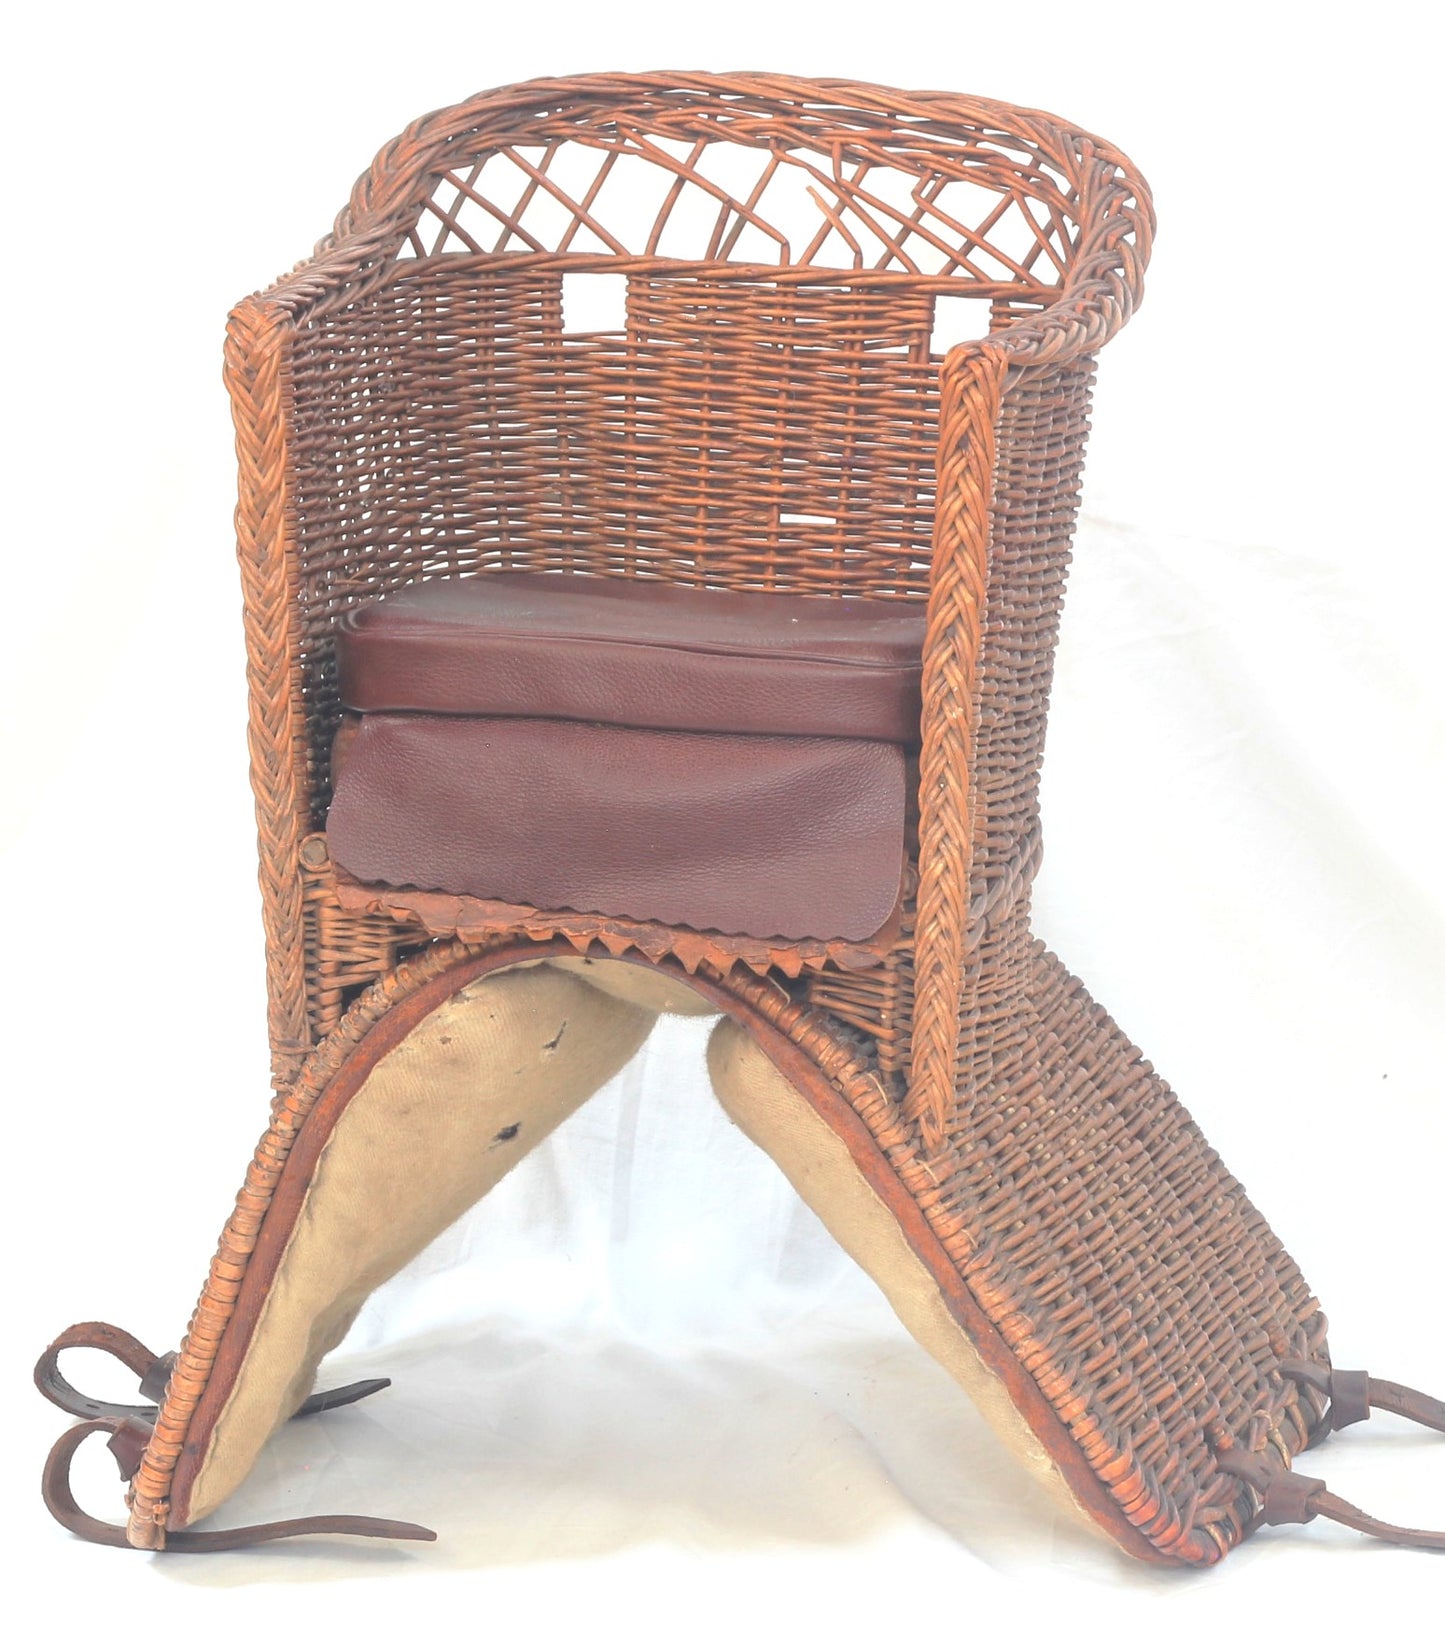 Antique Basket Saddle or Wicker Chair Saddle for a Child